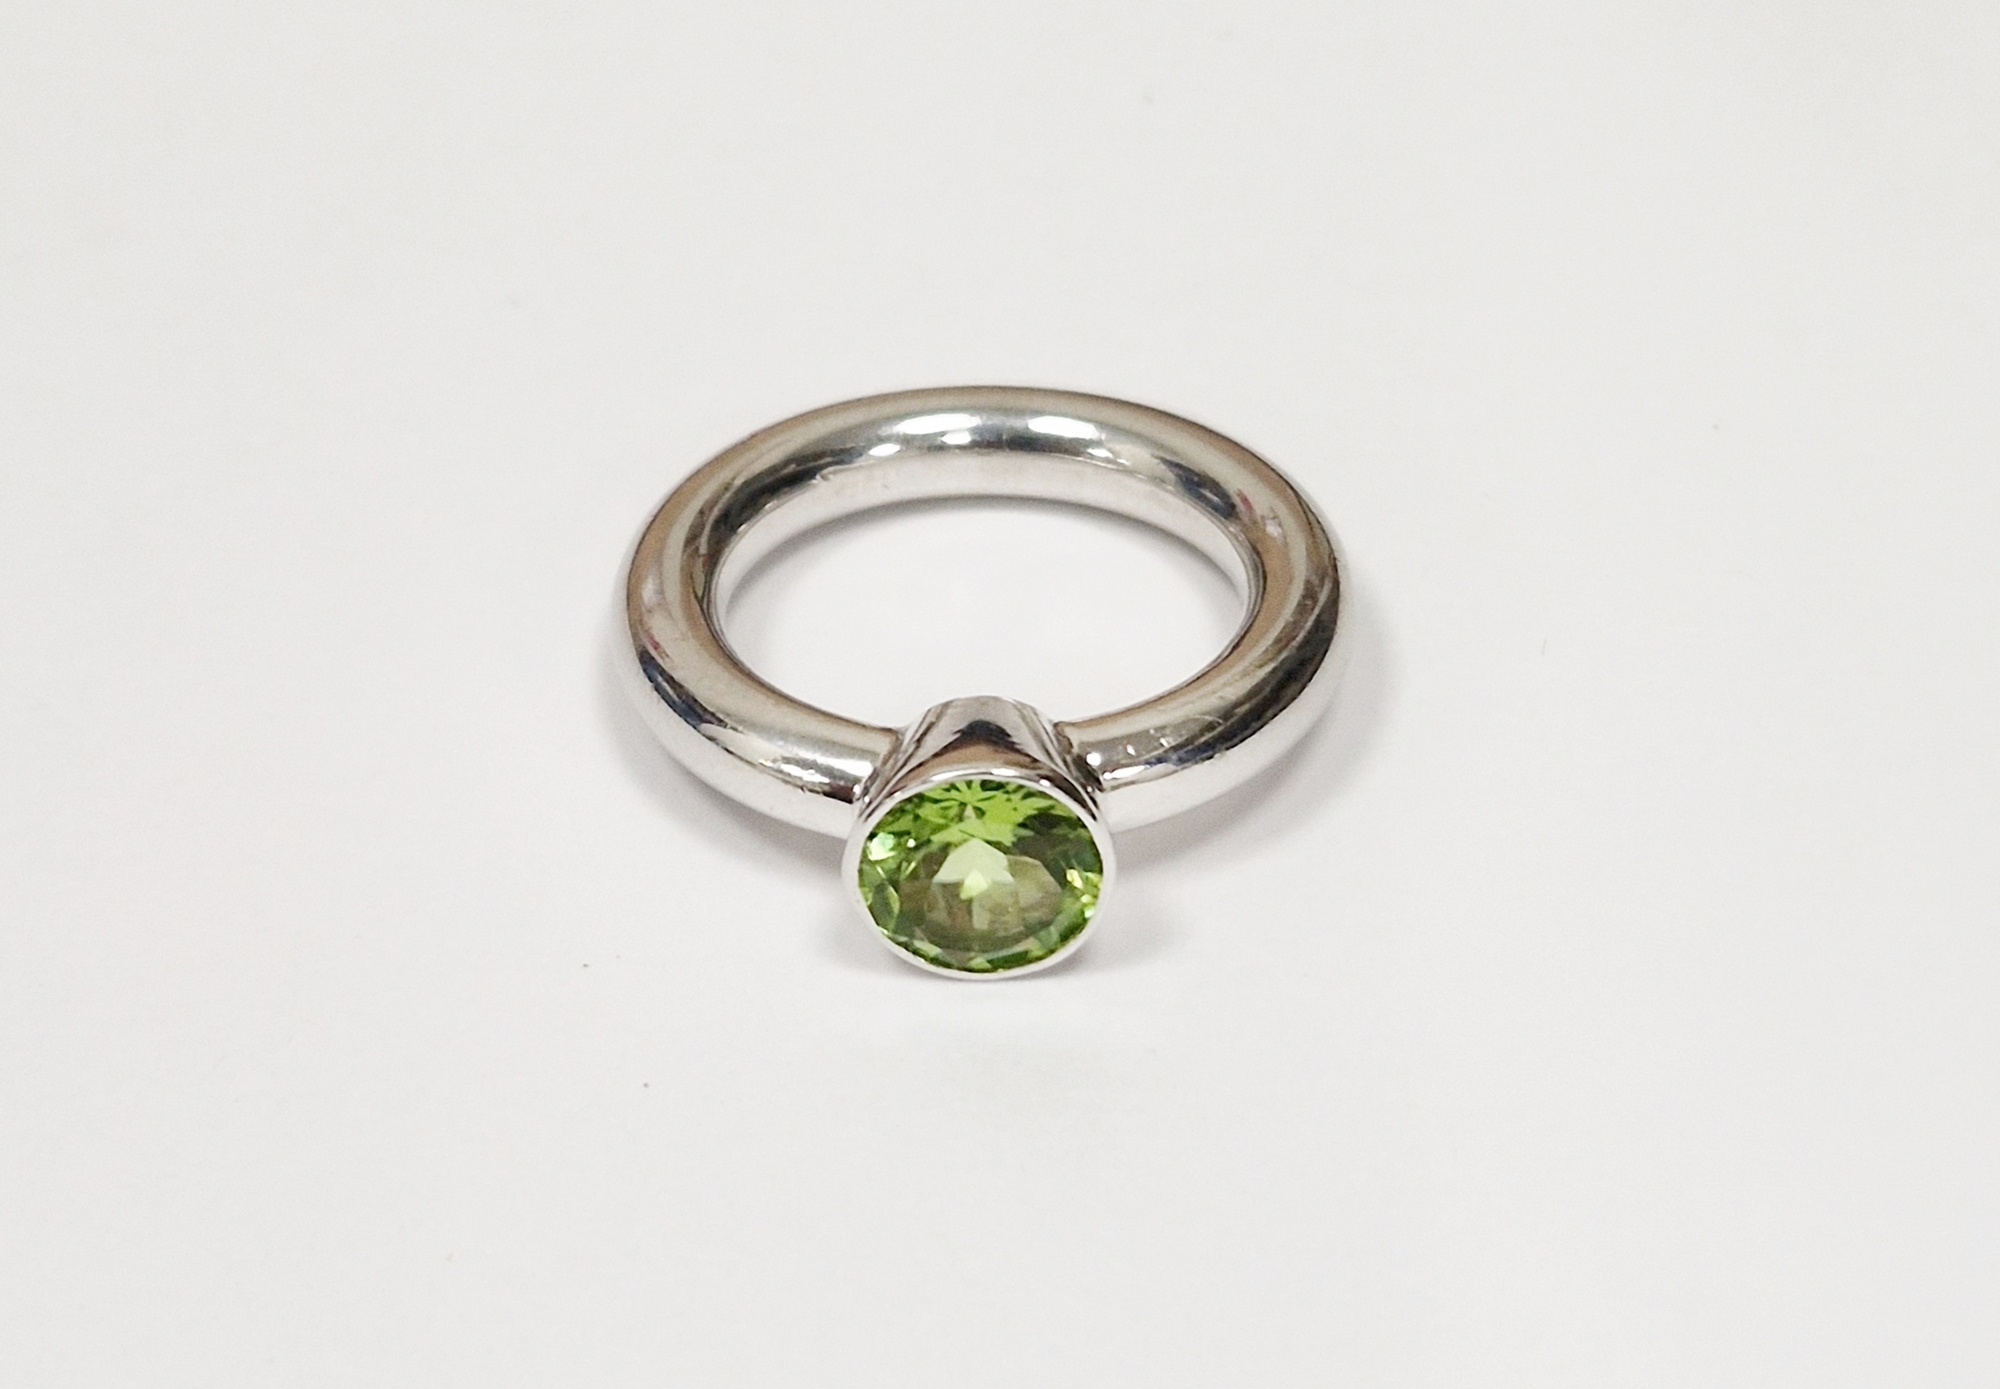 9ct white gold and green stone dress ring set peridot-coloured stone, on rounded shank, approx 11.